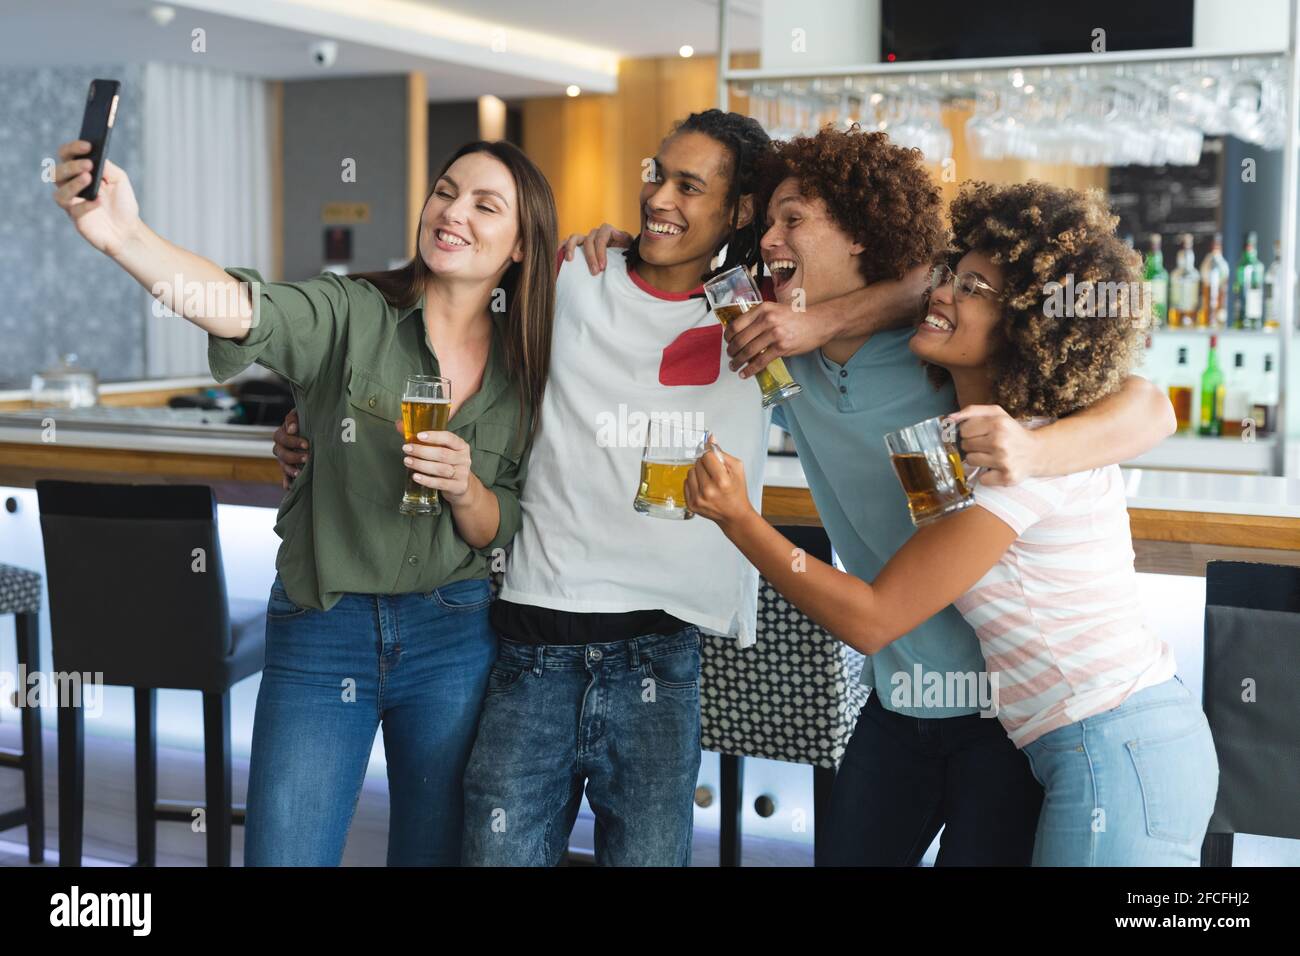 Diverse group of male and femalefriends raising glasses and taking selfie at bar Stock Photo